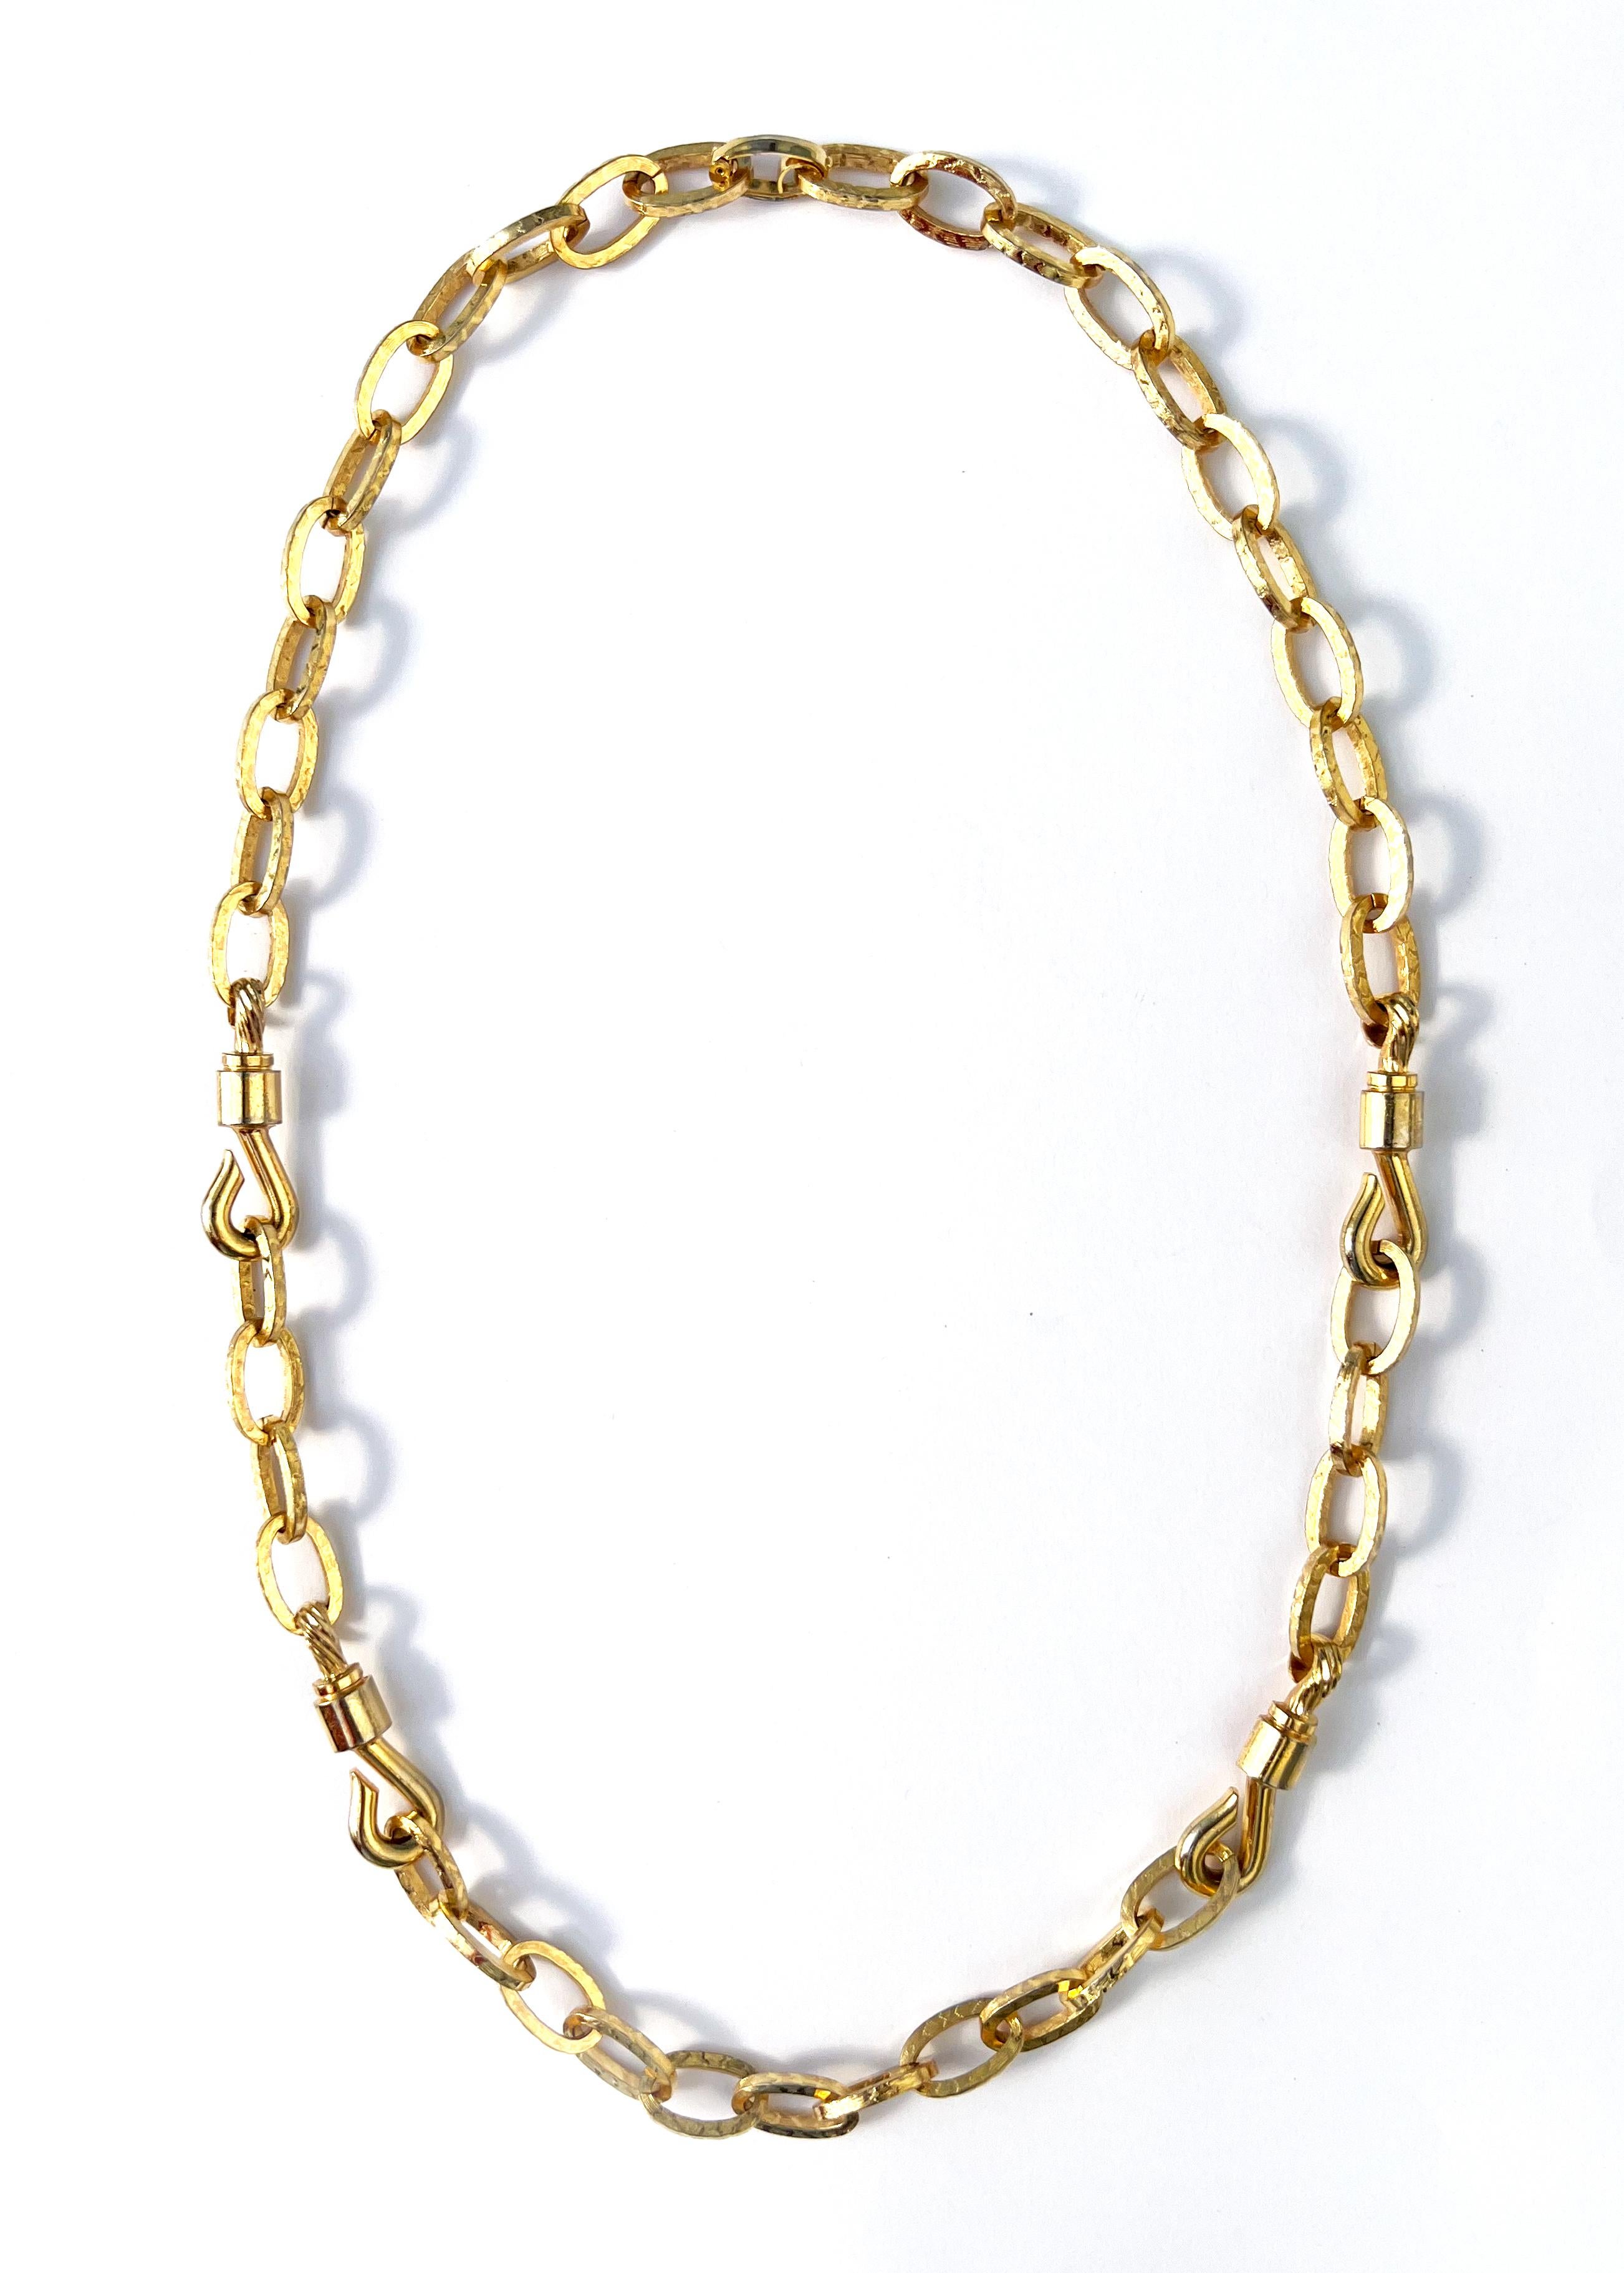 Modern Vintage Christian Dior Long Chain Necklace with Hook Details, 1972 For Sale